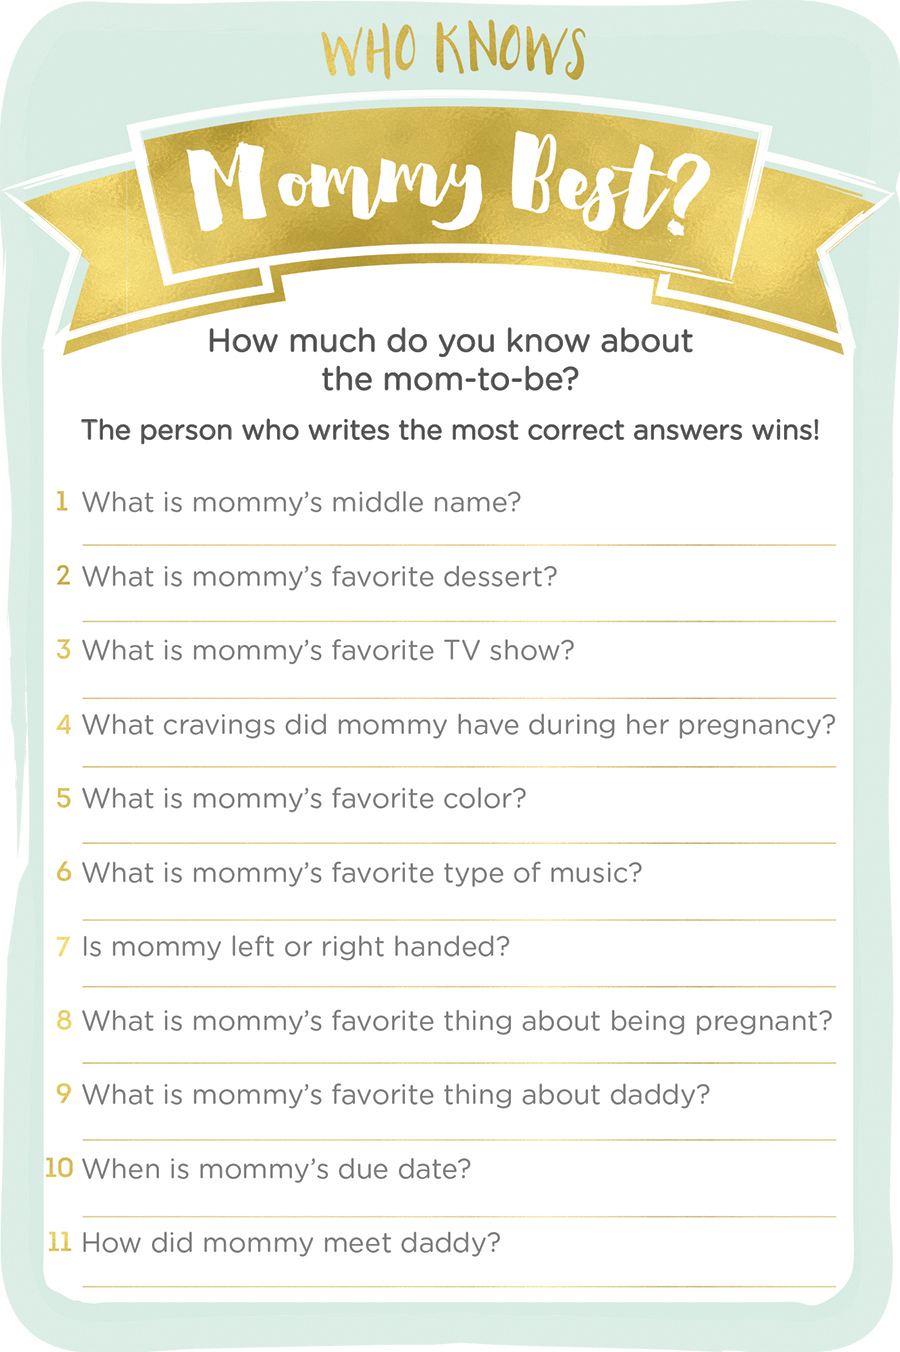 3 Baby Shower Games We Love + Printables - Baby Aspen Blog - Free Printable Baby Shower Games Who Knows Mommy The Best